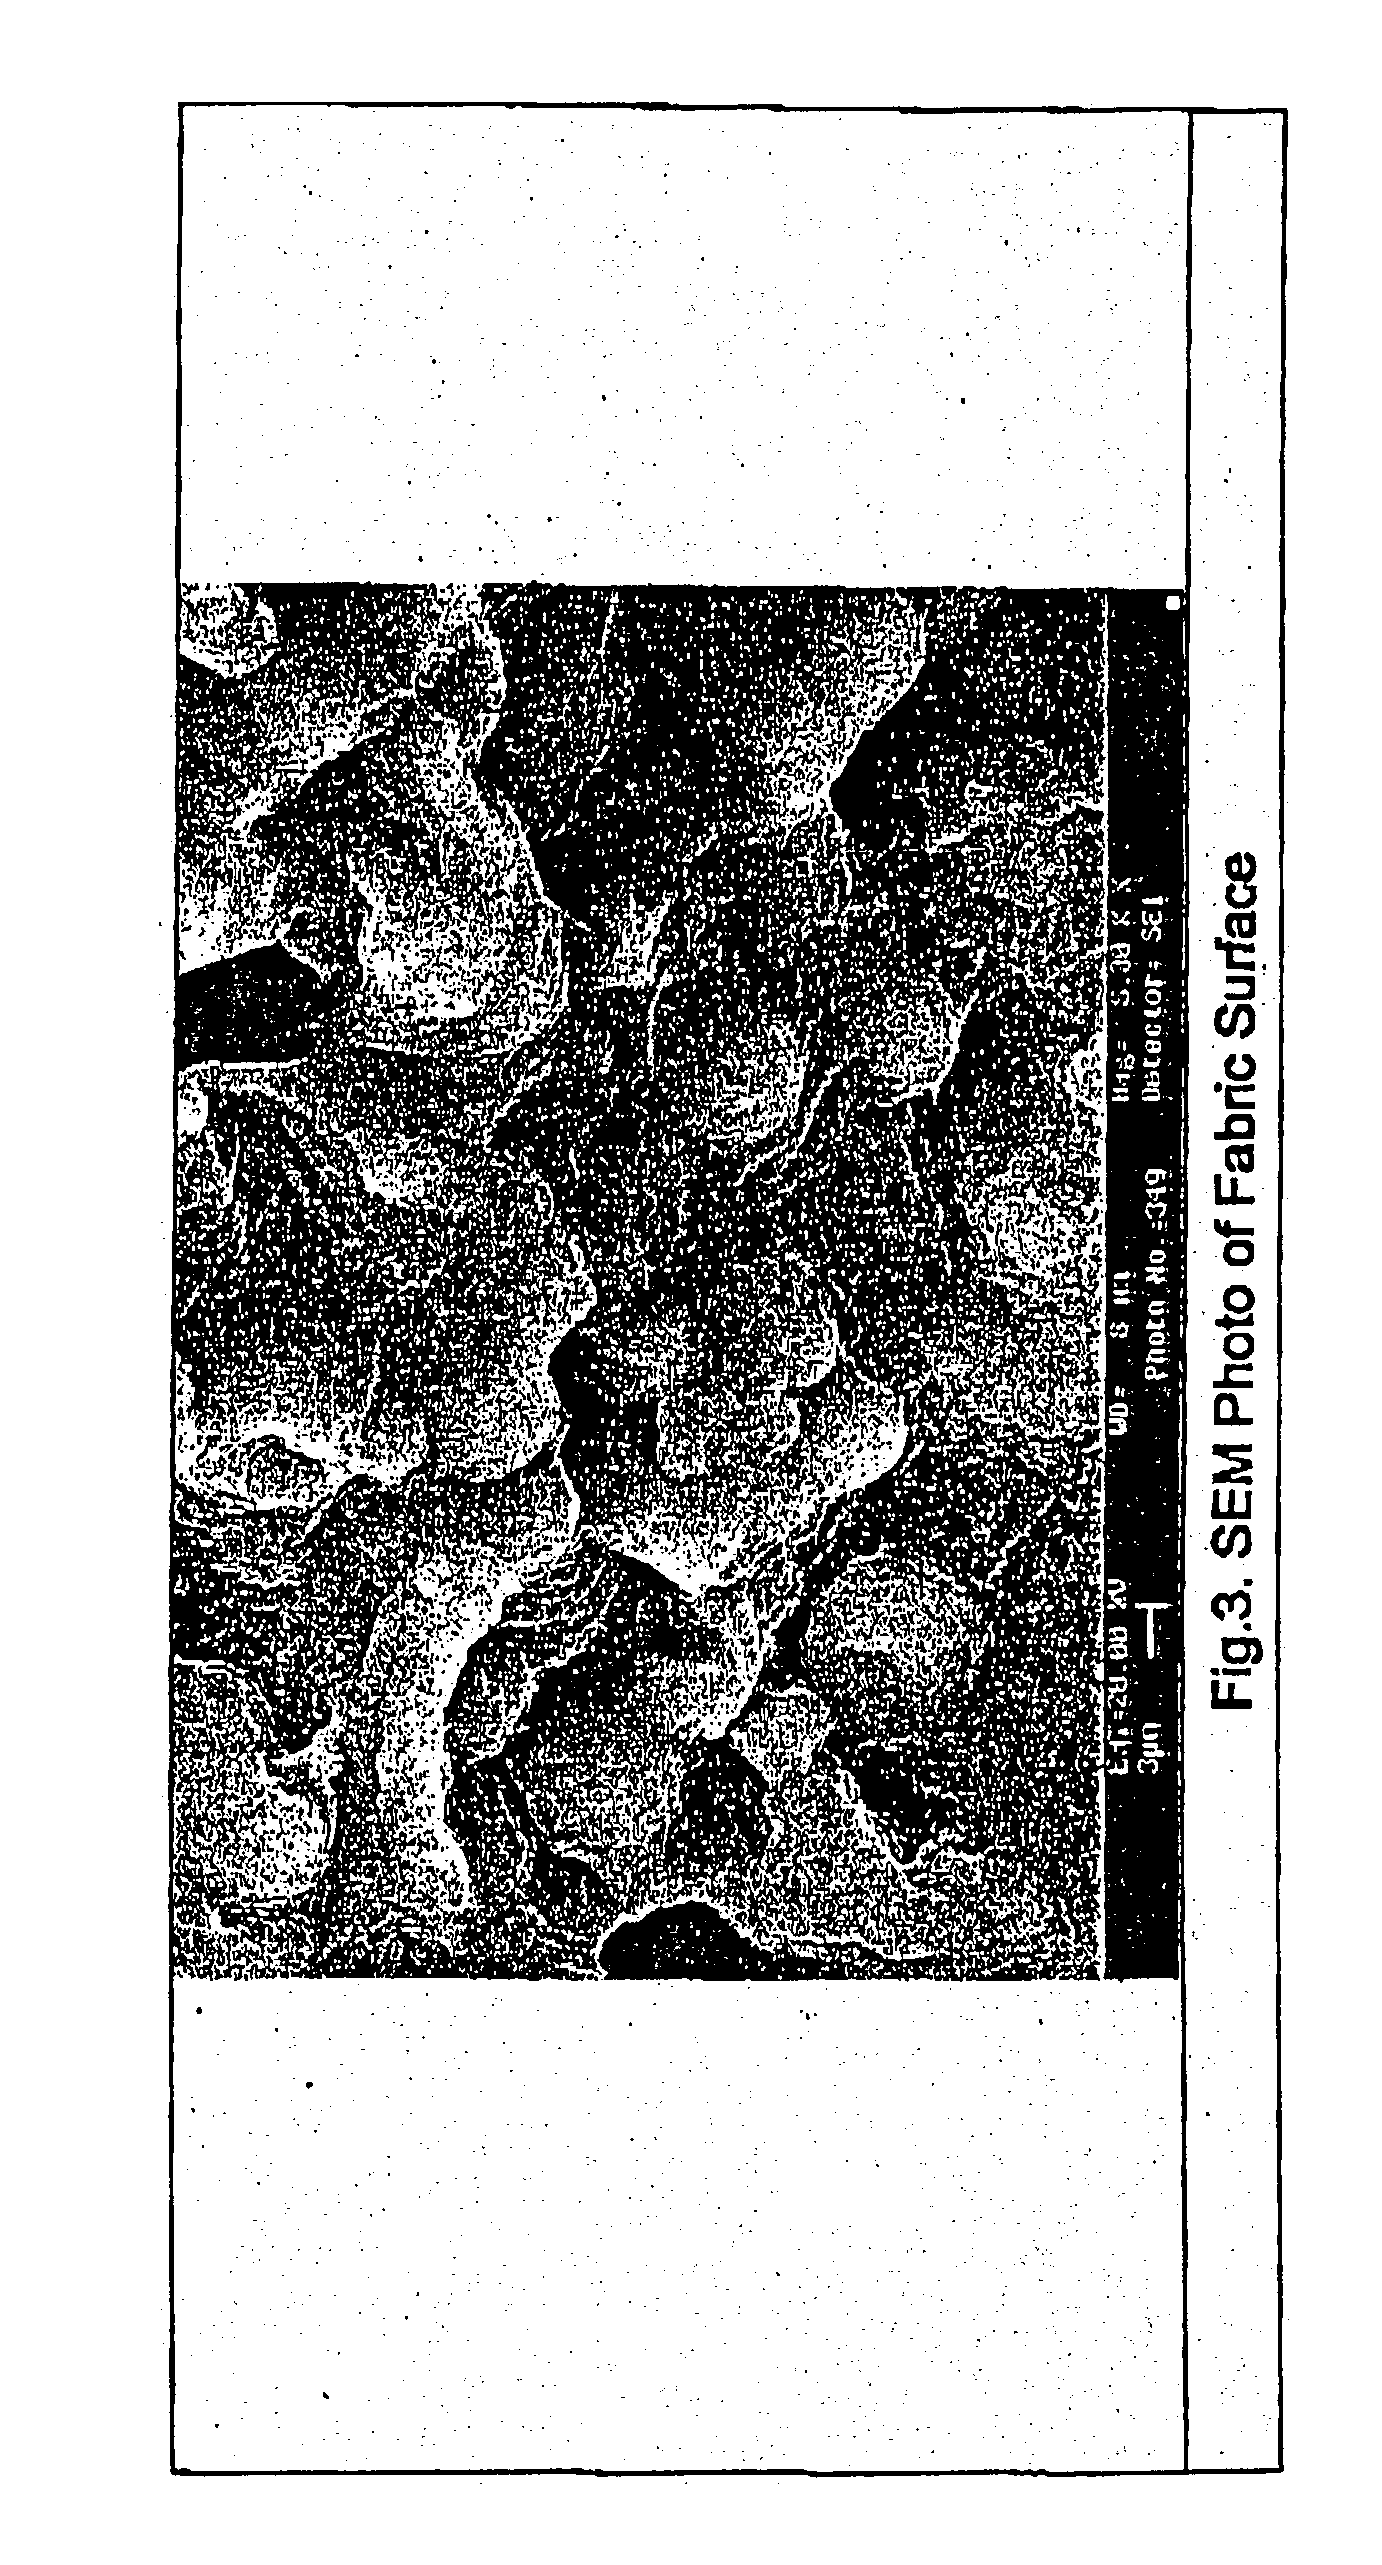 Method for encapsulating phase transitional paraffin compounds using melamine-formaldehyde and microcapsule resulting therefrom